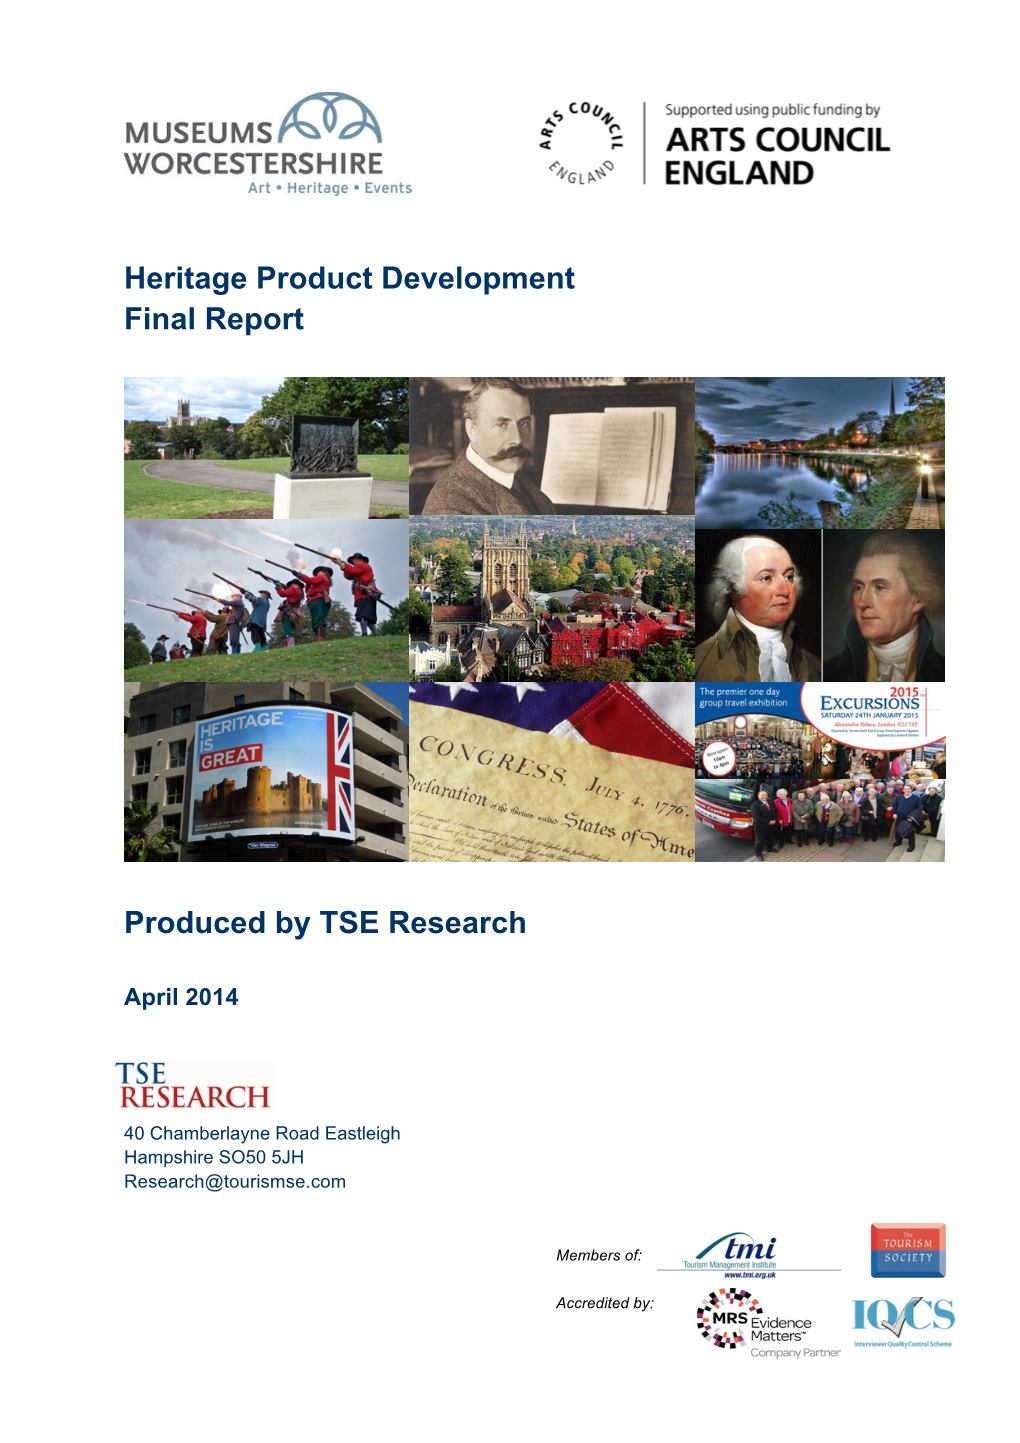 Heritage Product Development Final Report Produced by TSE Research